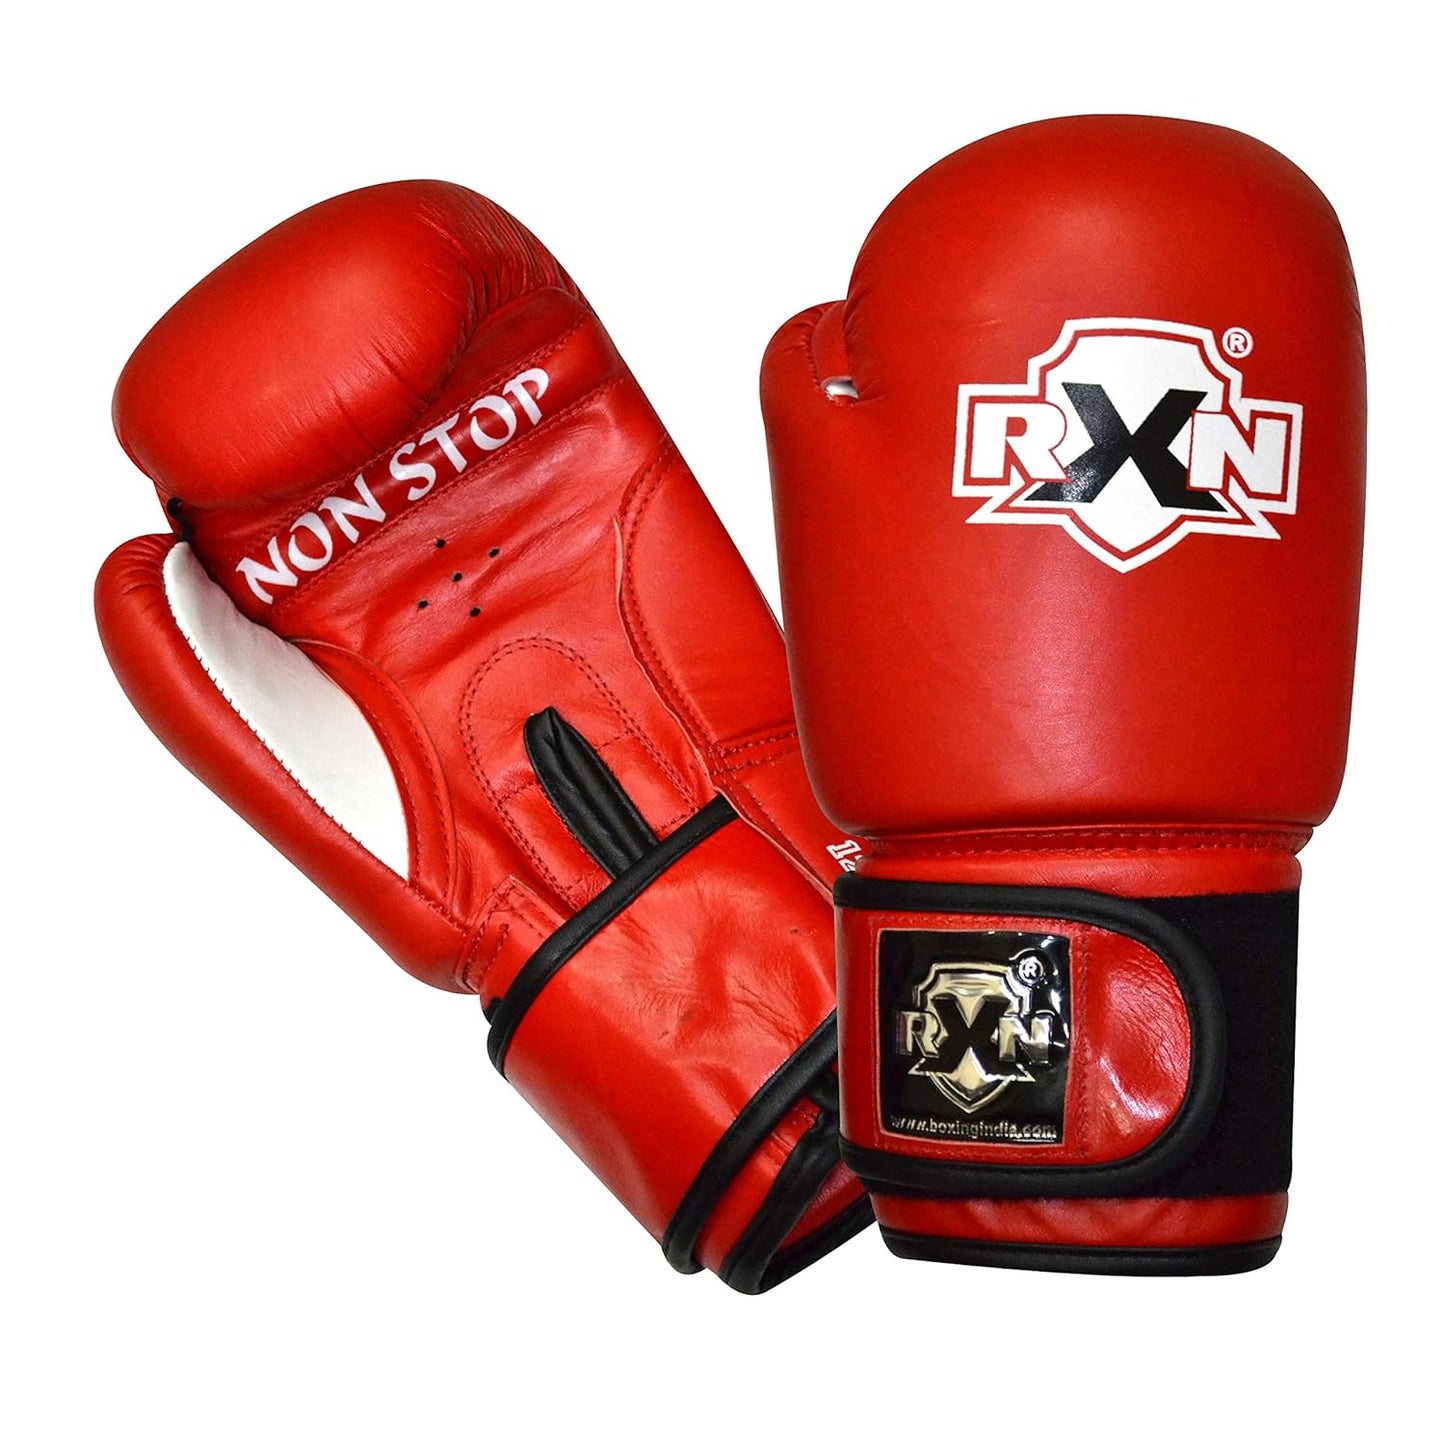 RXN Amateur Contest Boxing Gloves All Leather (BG-11)